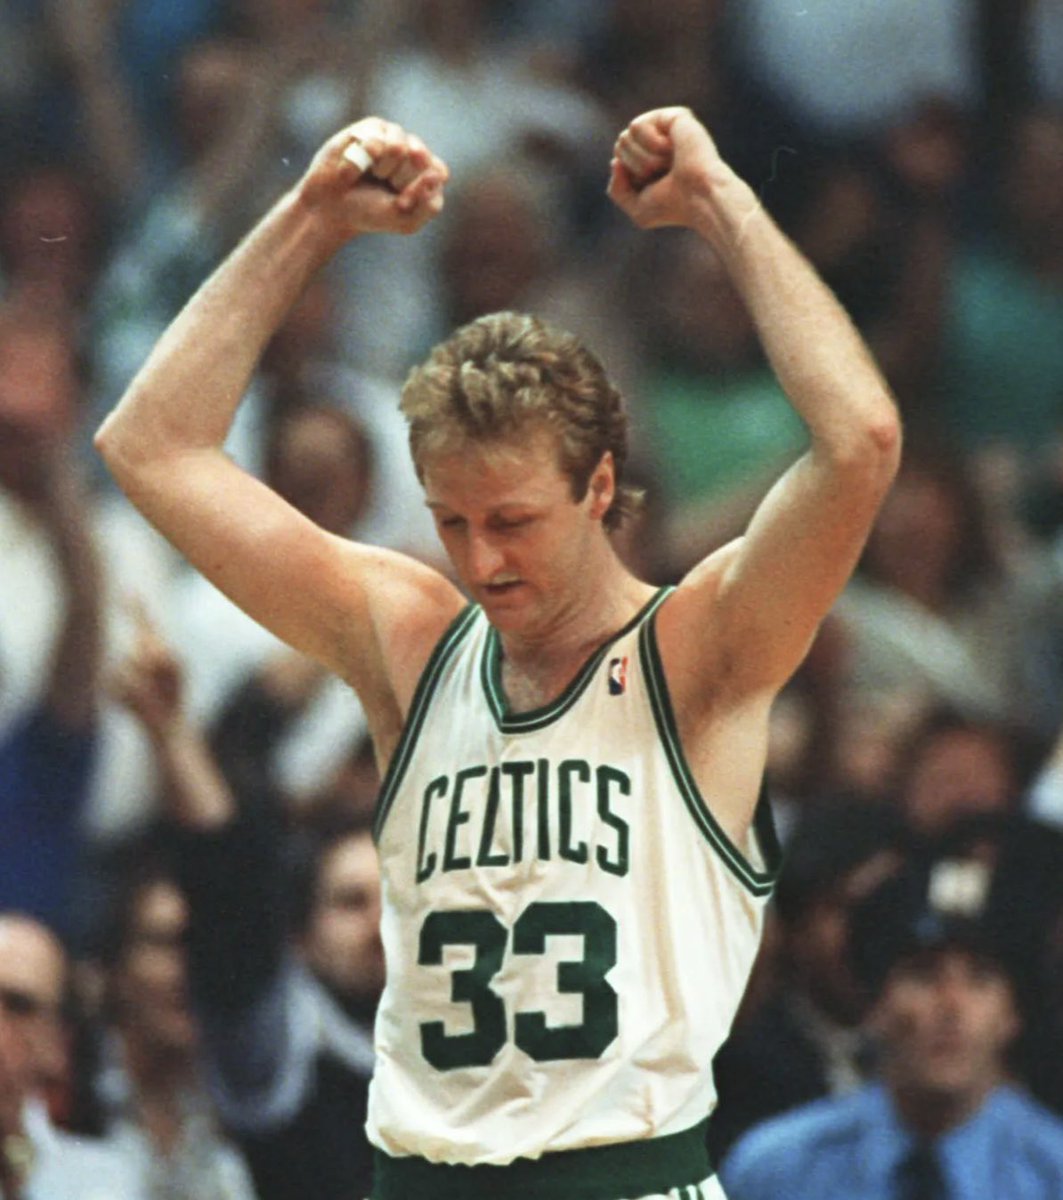 “A winner is someone who recognizes his God-given talents, works his tail off to develop them into skills, and uses these skills to accomplish his goals.” - Larry Bird